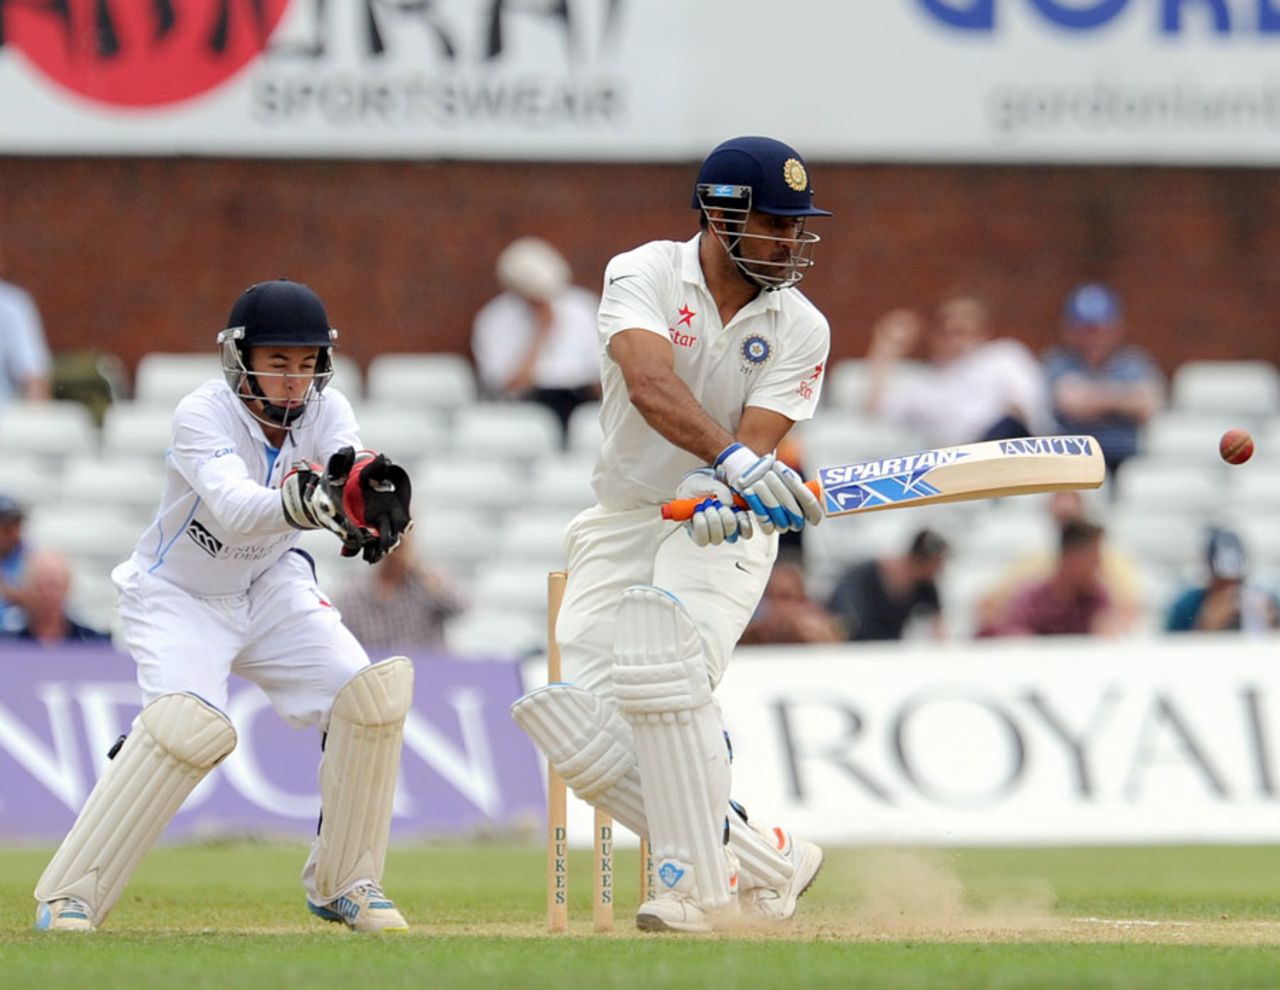 MS Dhoni guides one to leg, Derbyshire v Indians, tour match, Derby, 2nd day, July 2, 2014